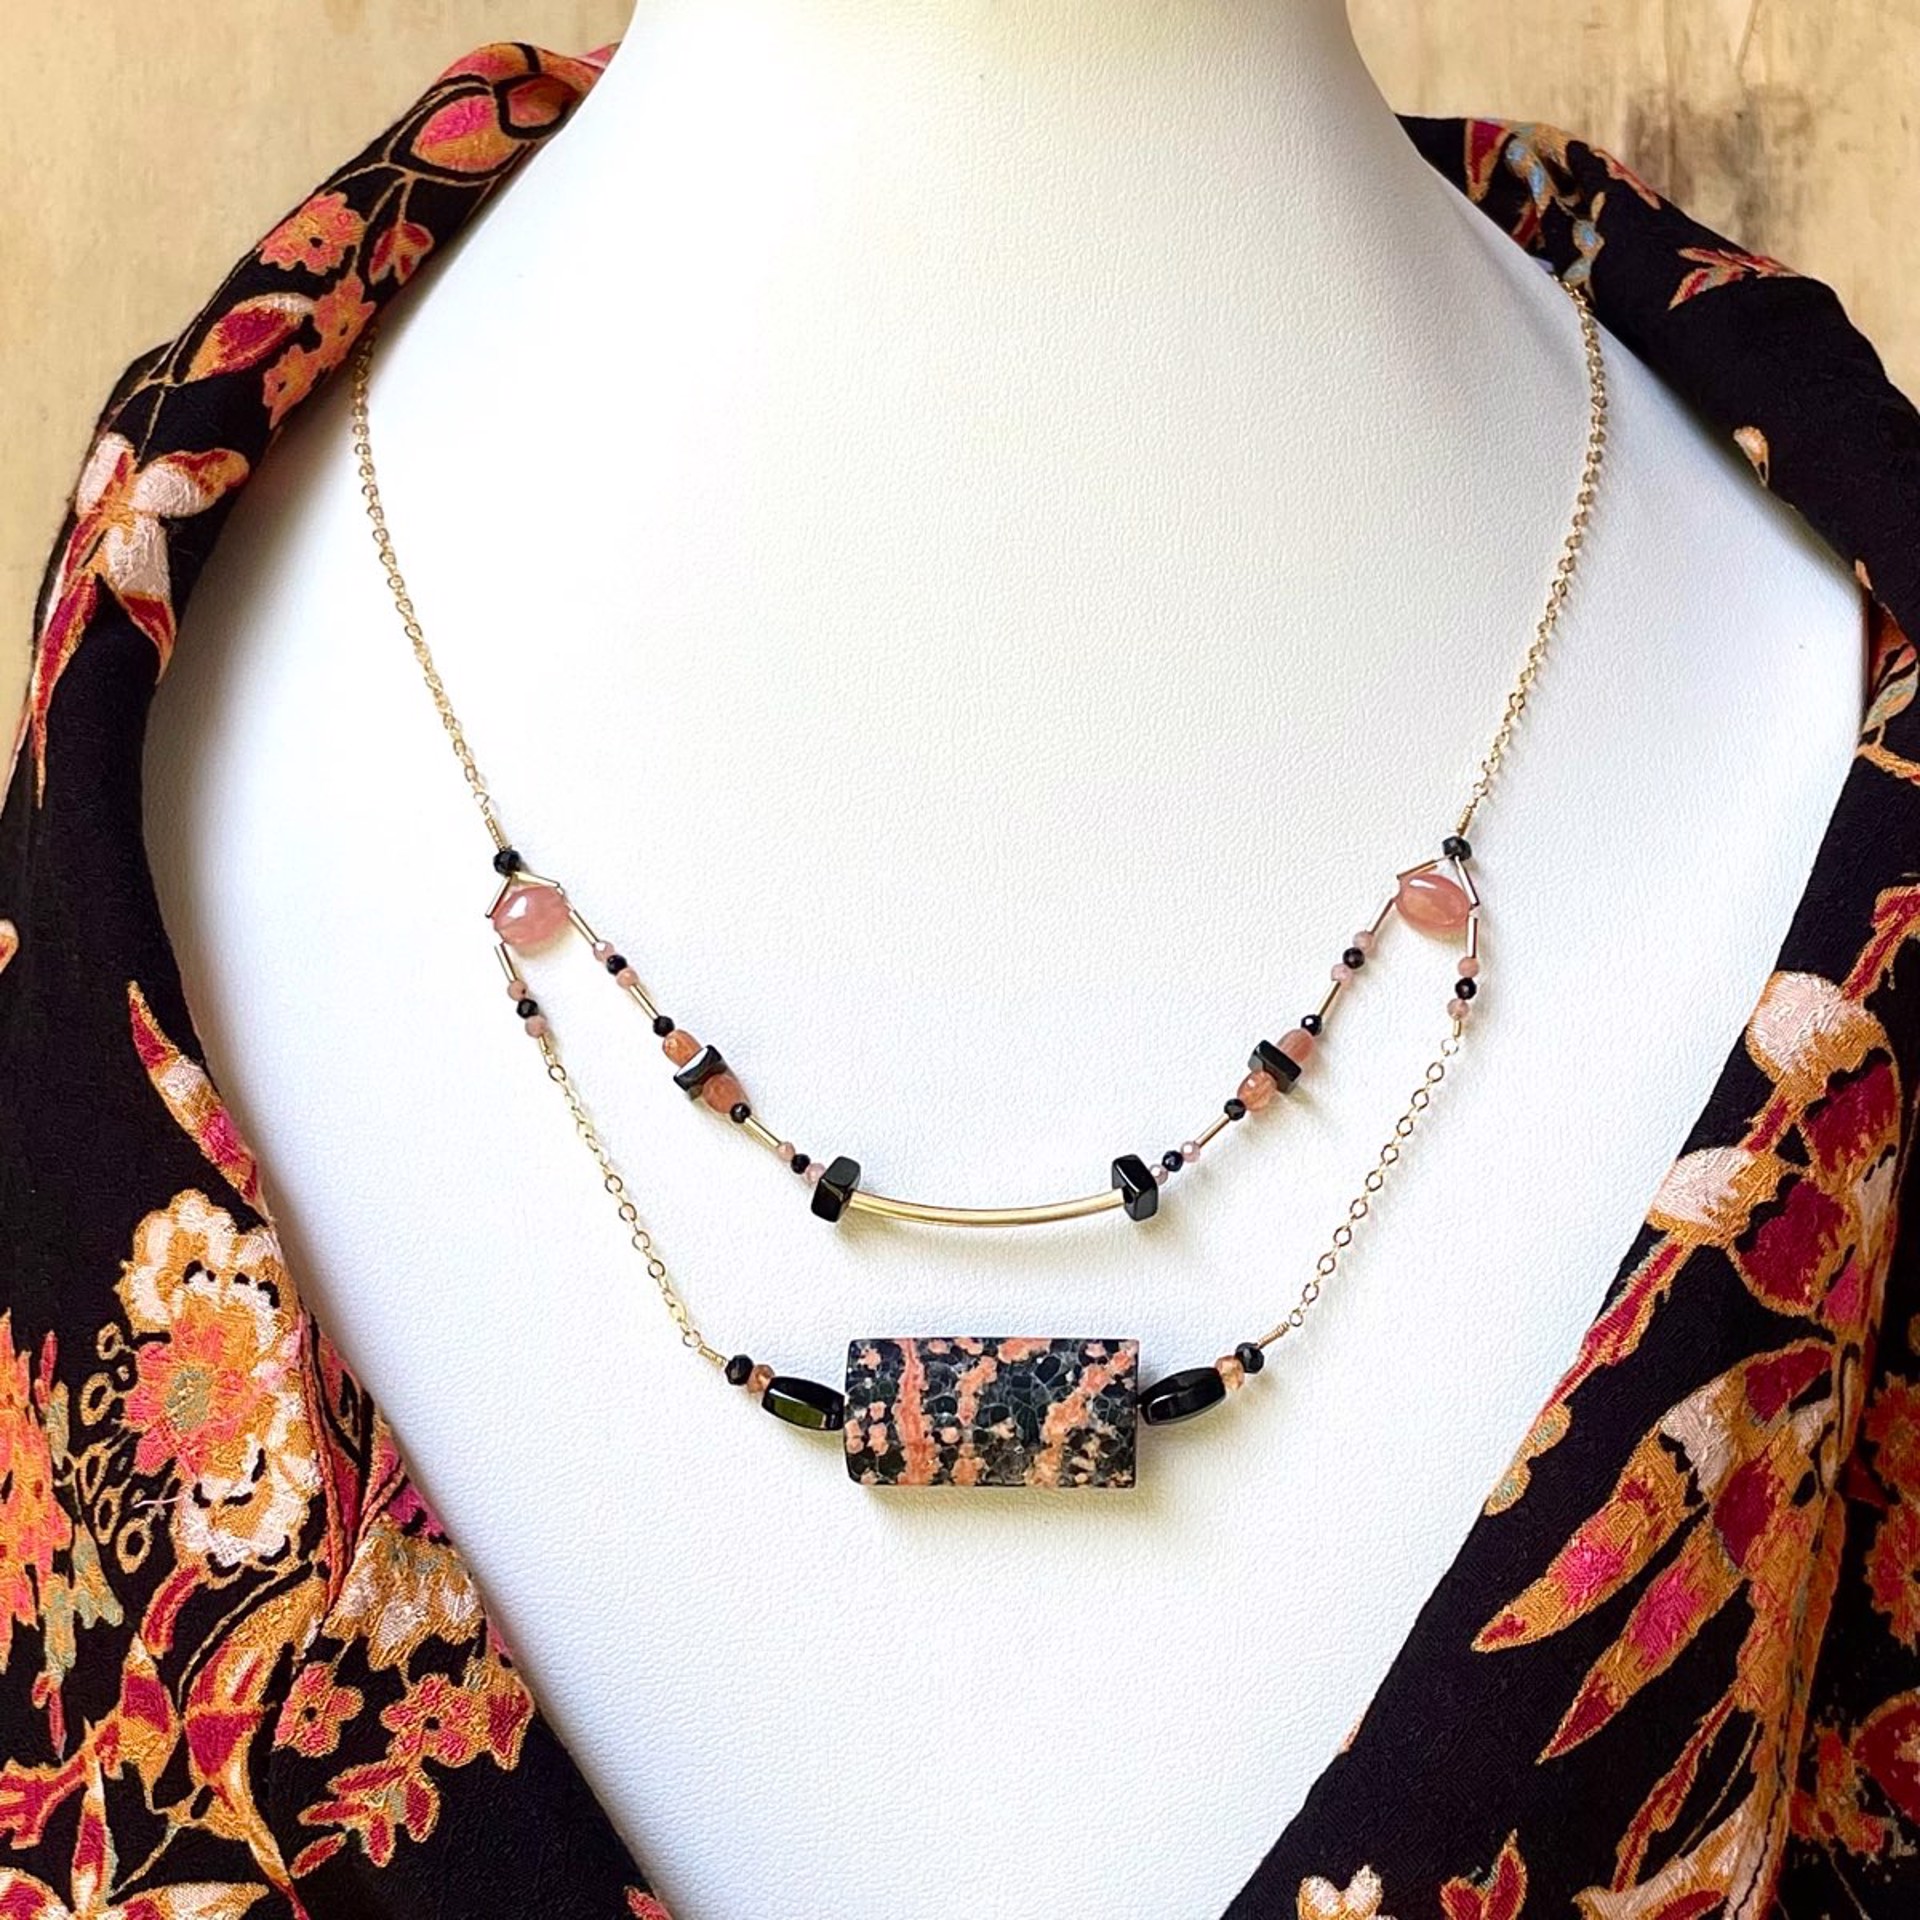 Red Snowflake Obsidian with Rhodochrosite and Black Spinel 14K Gold Fill Double Necklace by Lisa Kelley